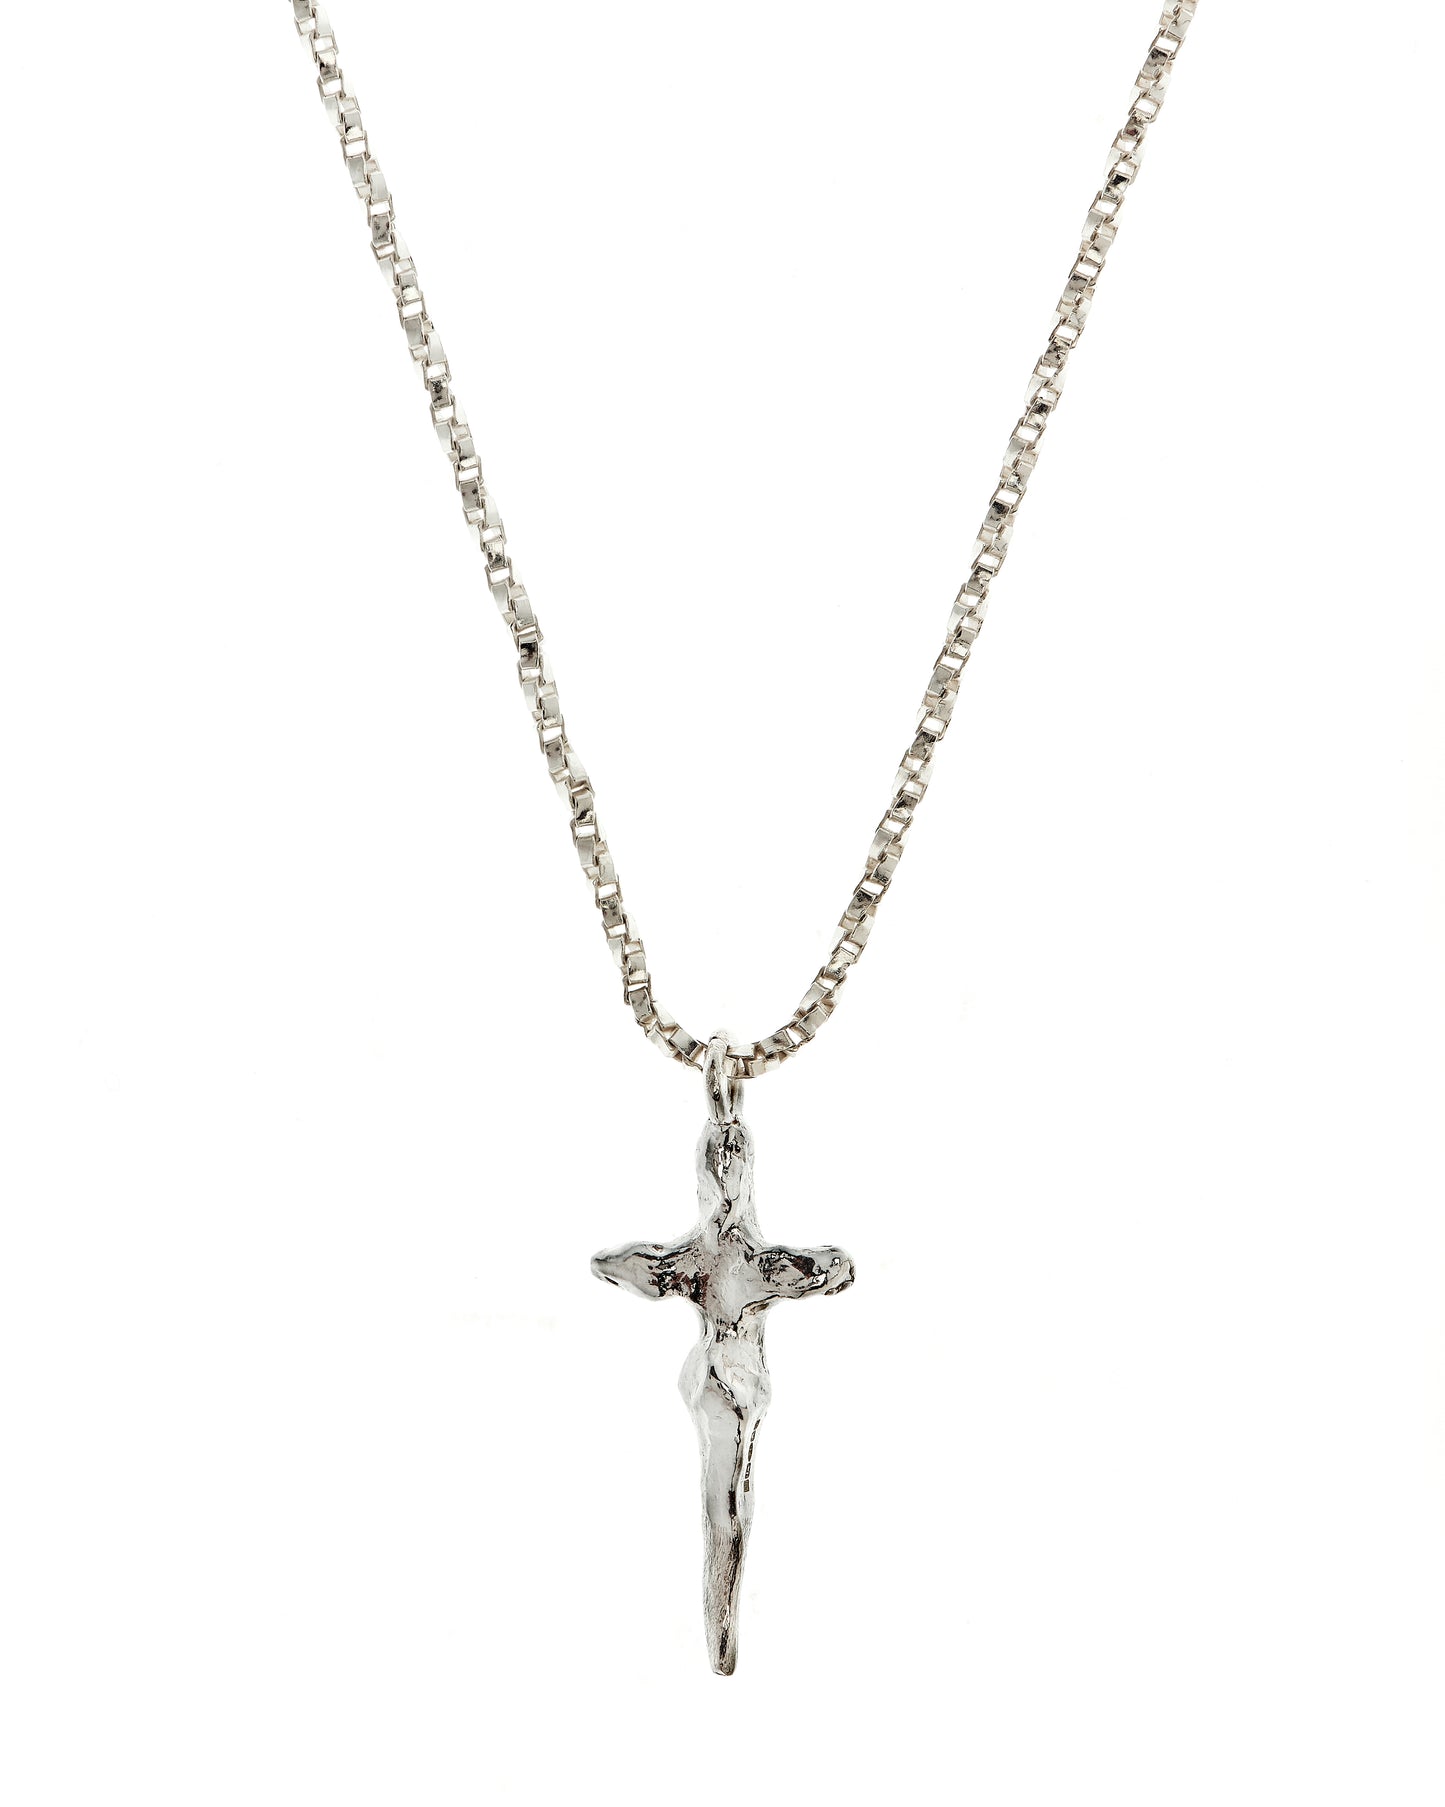 Close up of crucifix necklace in sterling silver